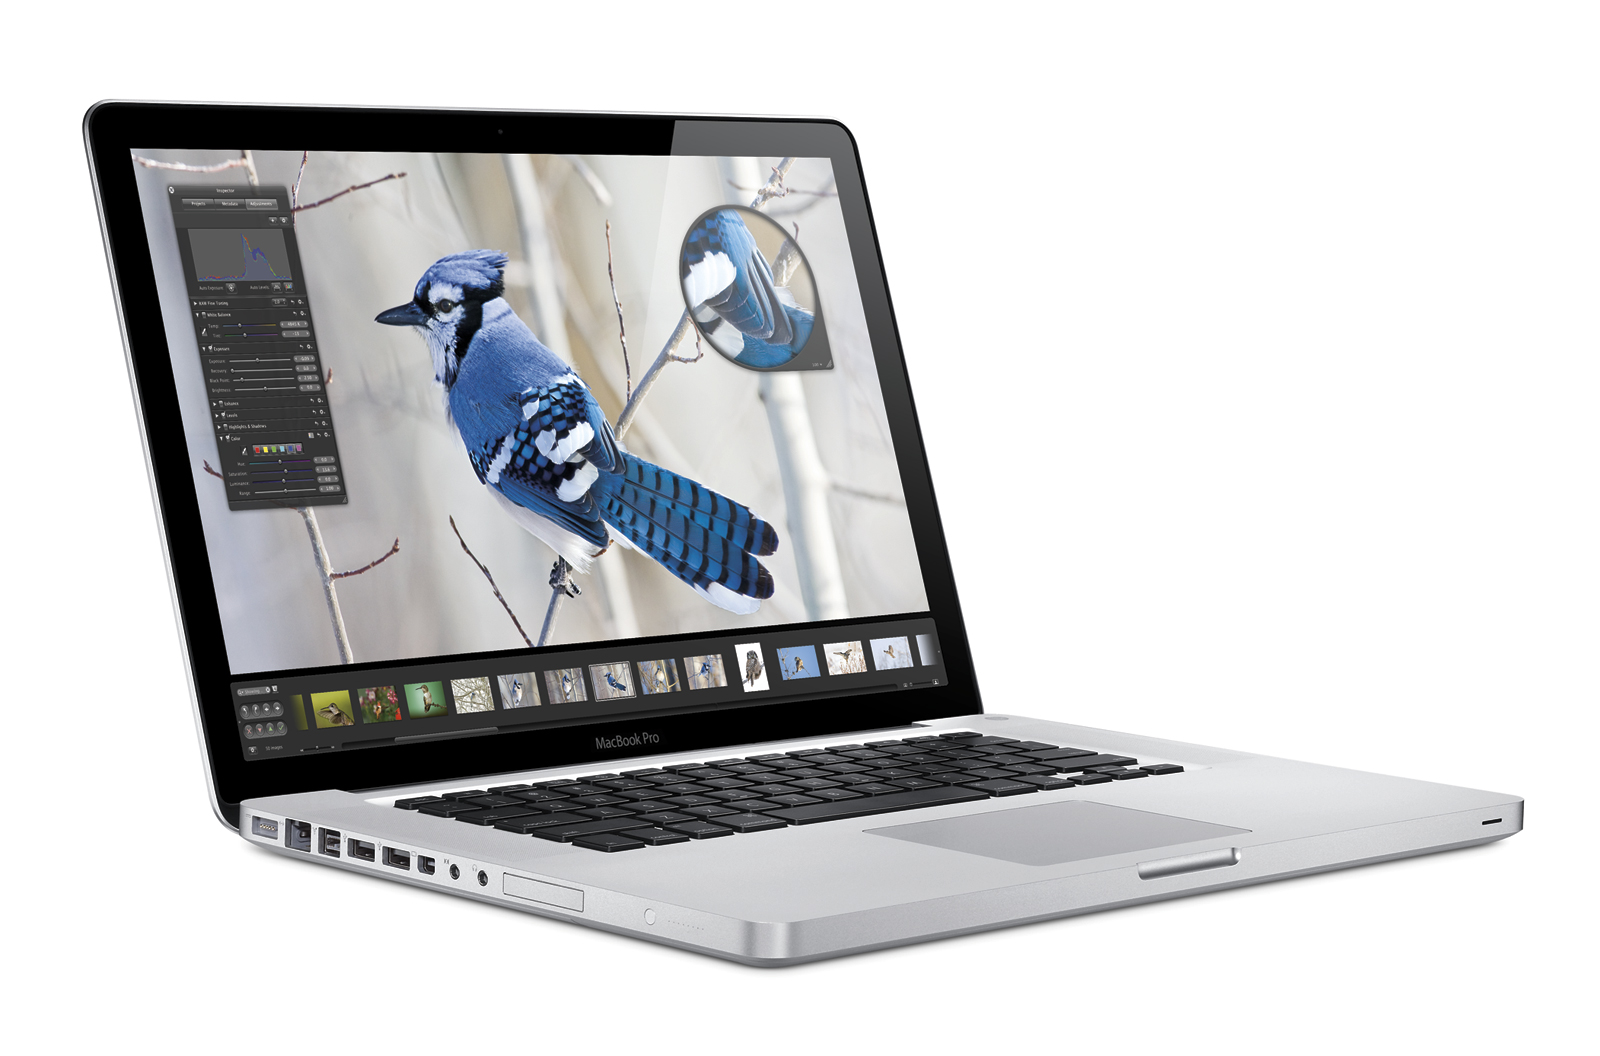 MacBook Pro 15-inch Mid 2010 – Tech Specs, Release Date, and Price